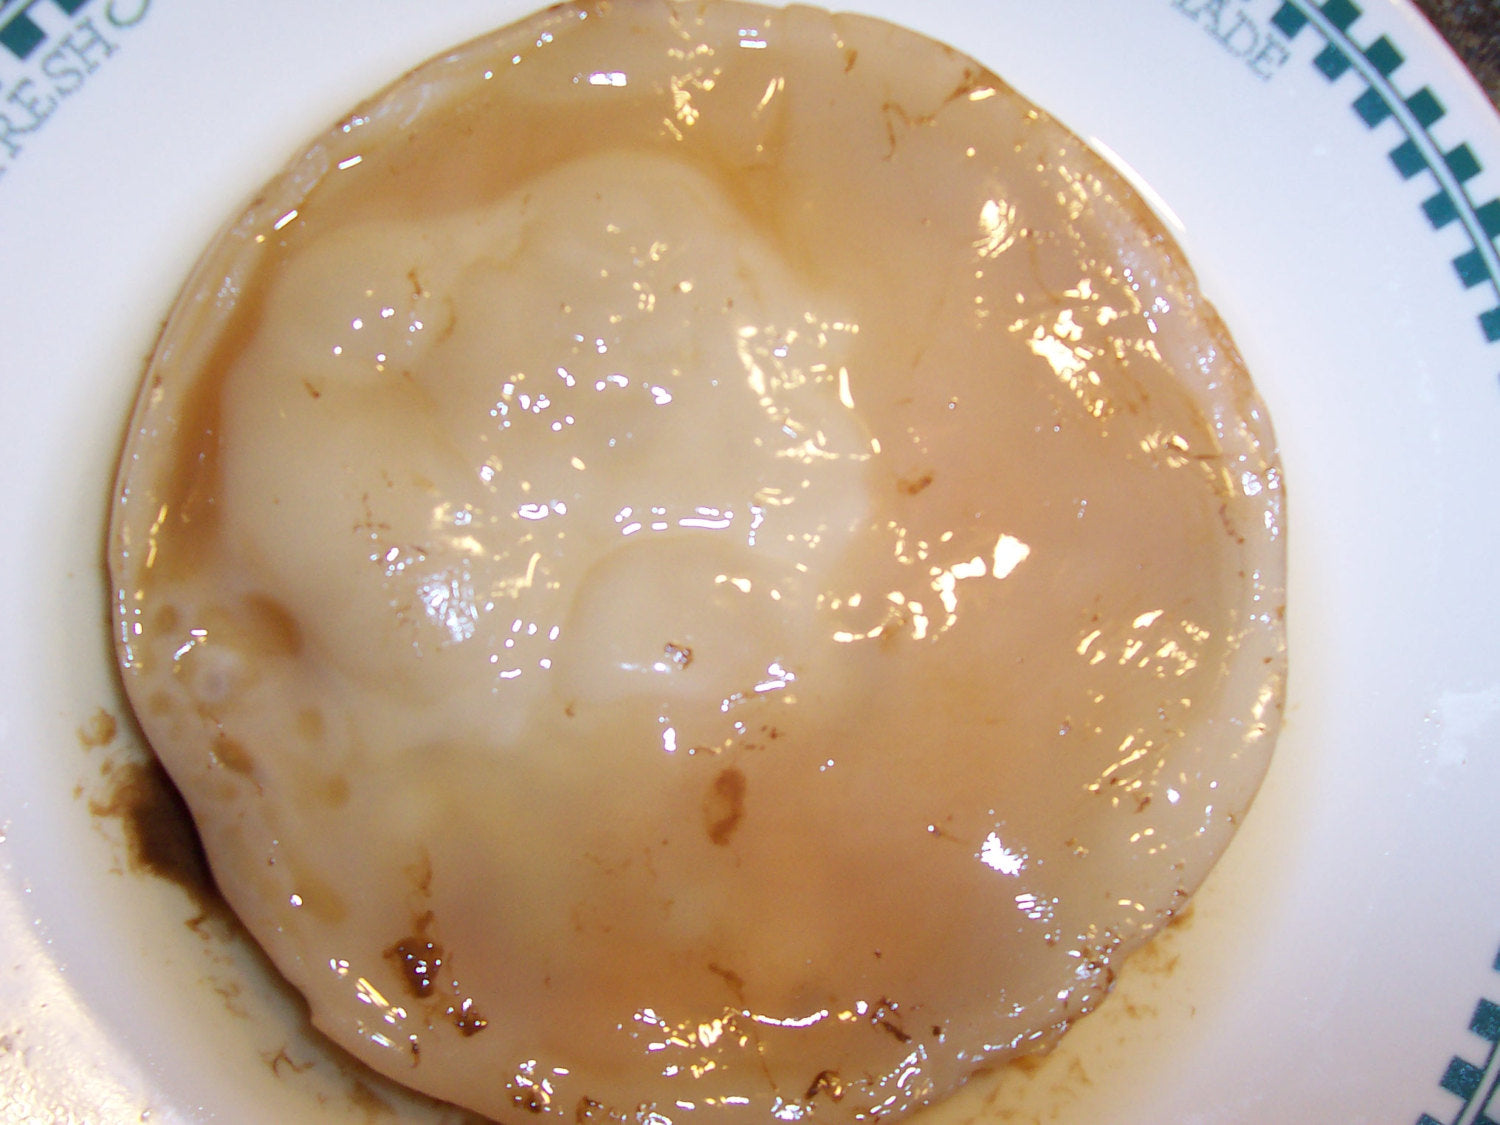 Kombucha Fermented Probiotic Tea Scoby*Mother* with Starter Tea Quart Sized